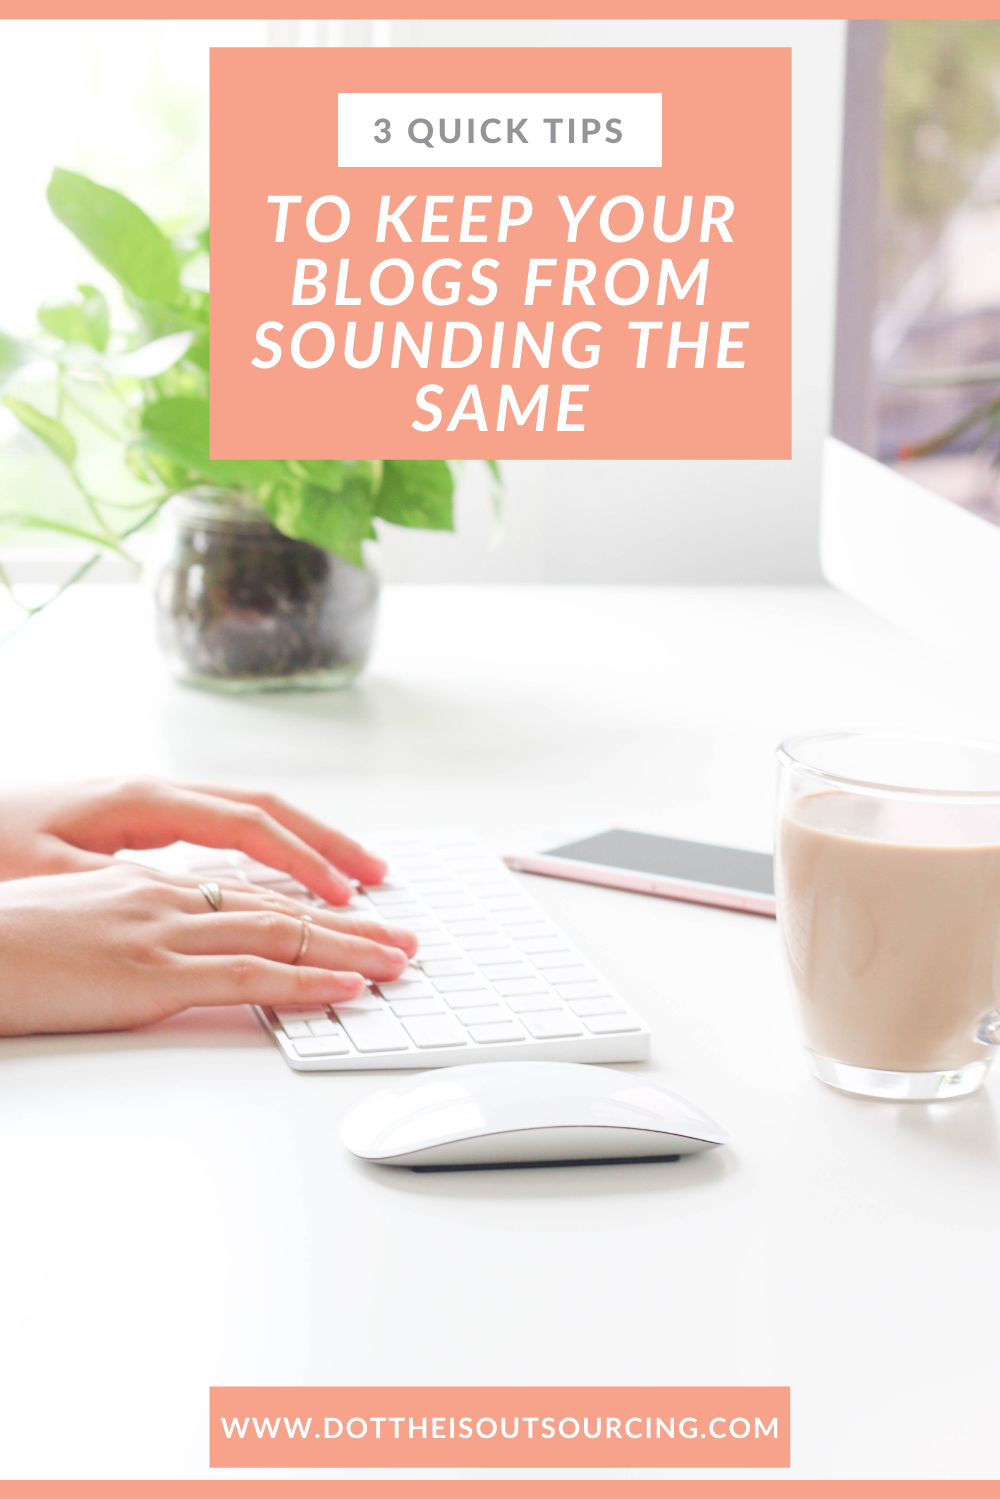 tips to vary the content of your blog